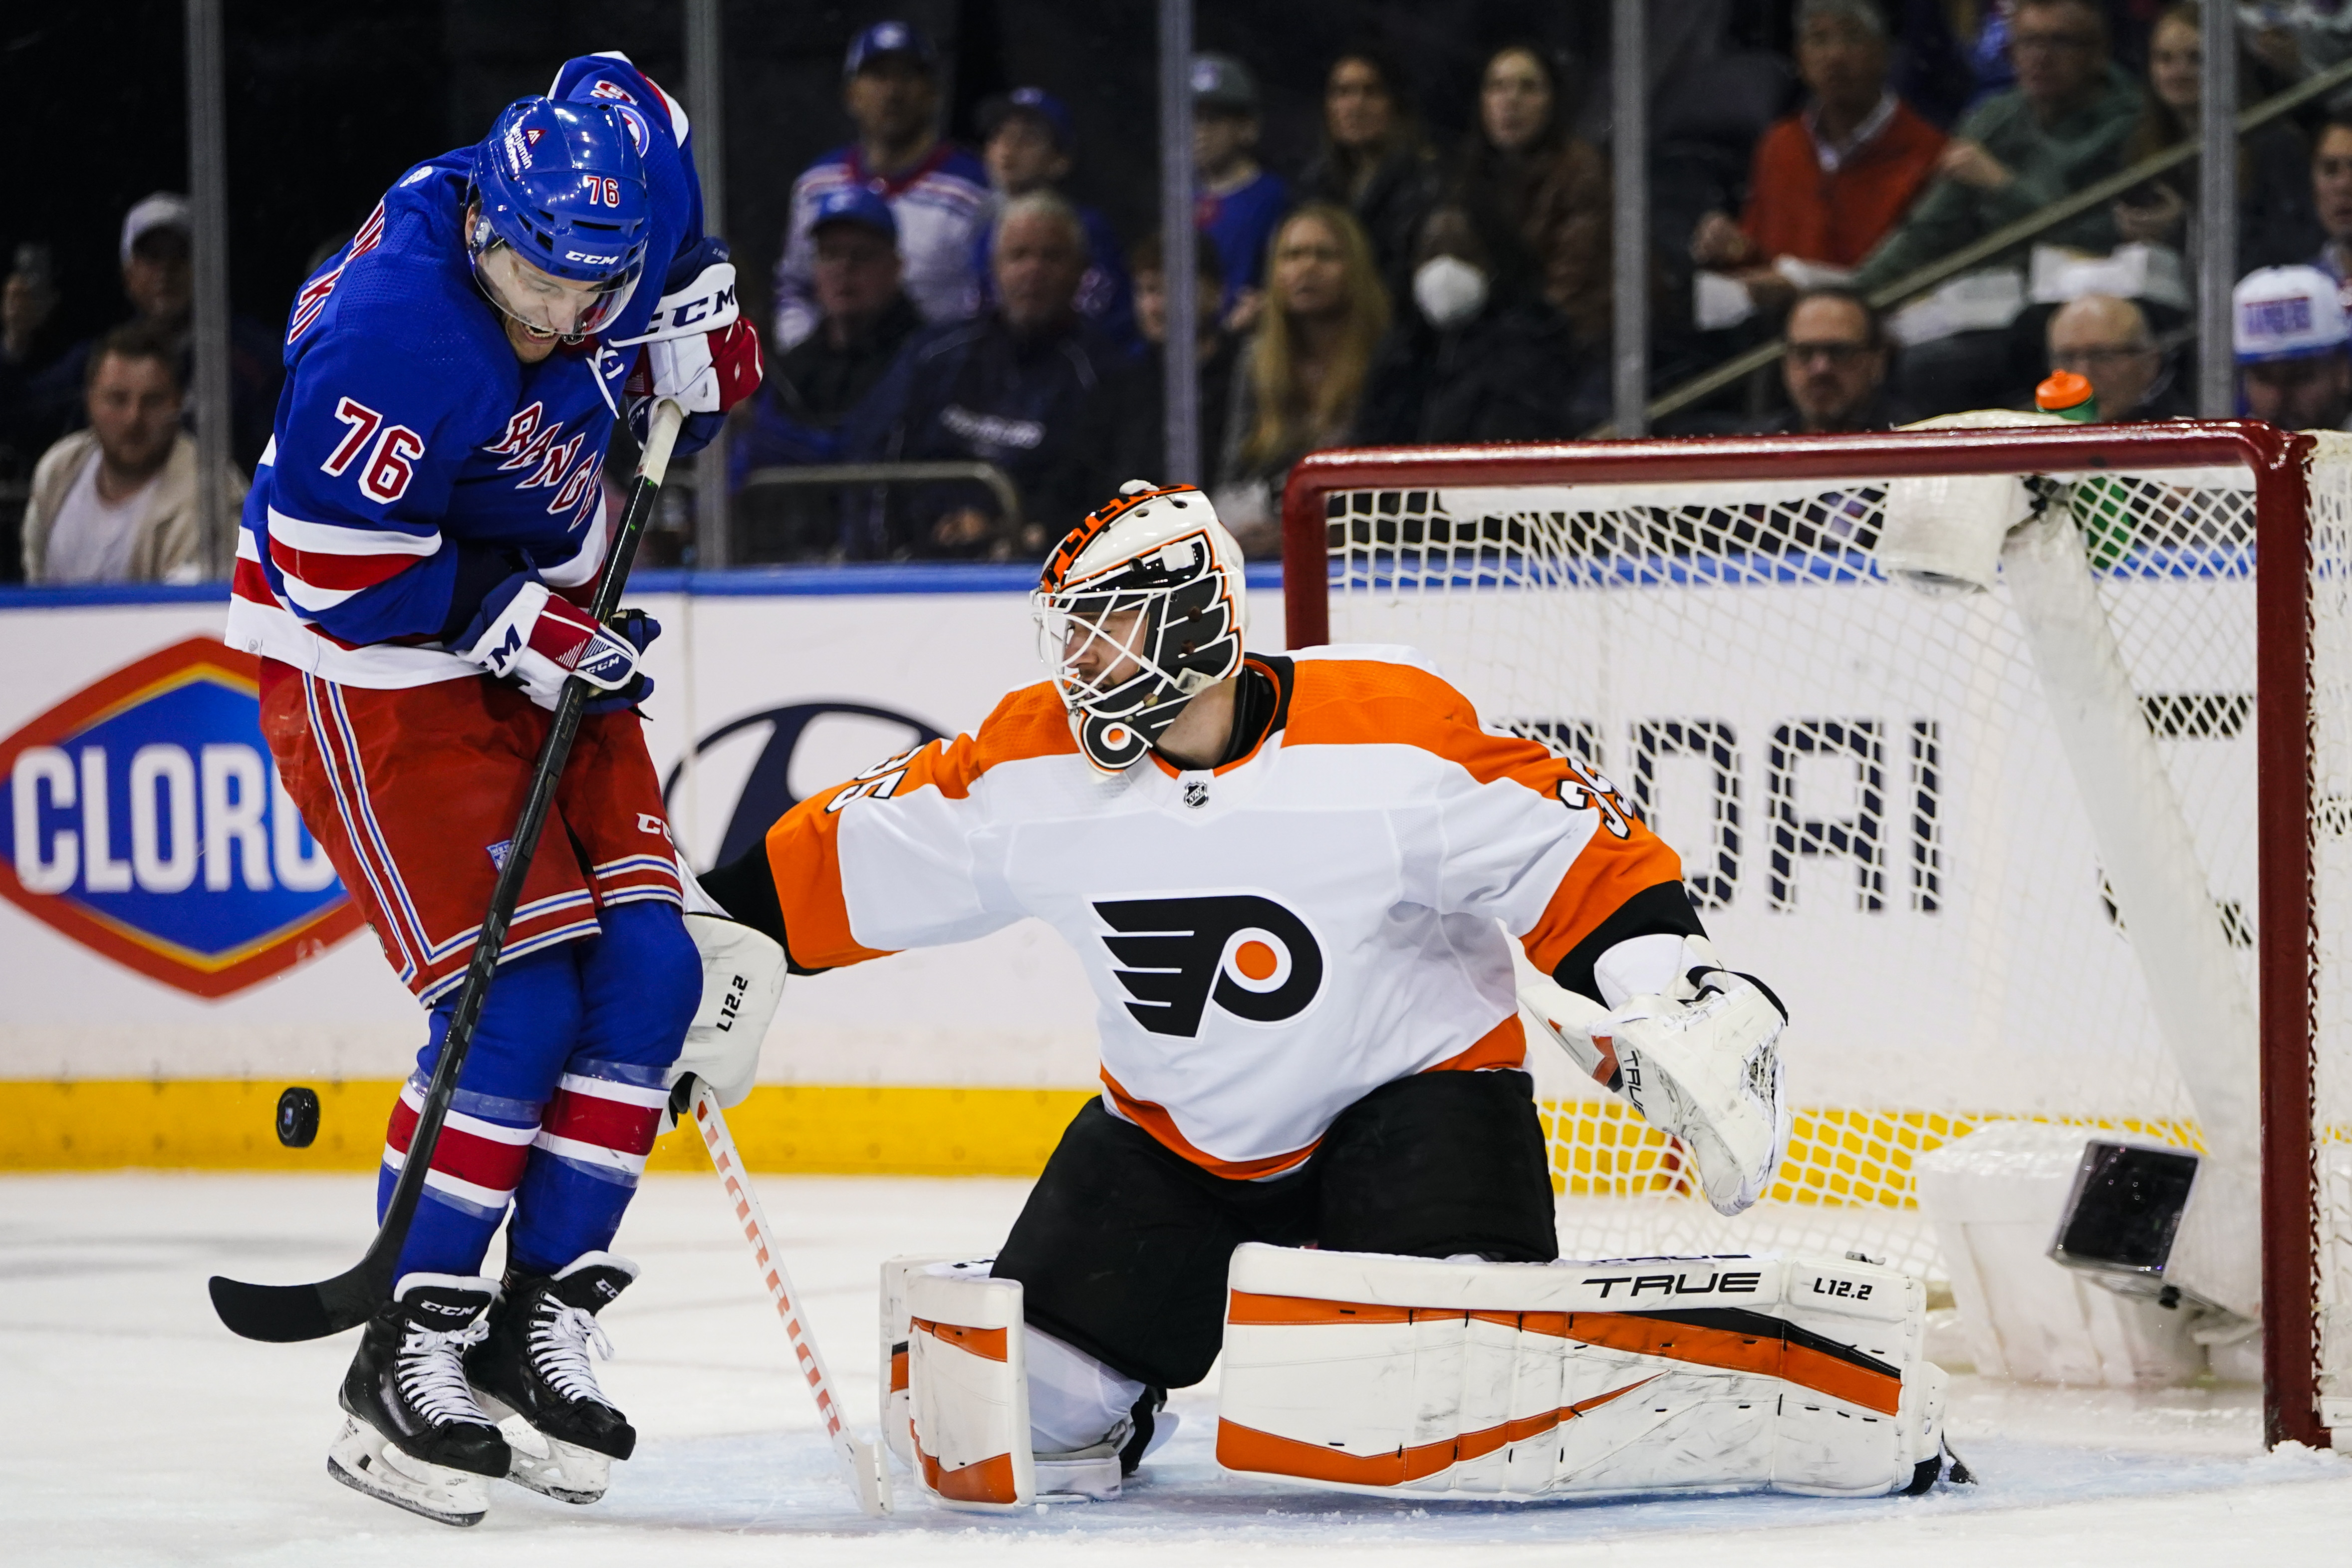 Refs officially botch Flyers penalty in loss to Rangers – New York